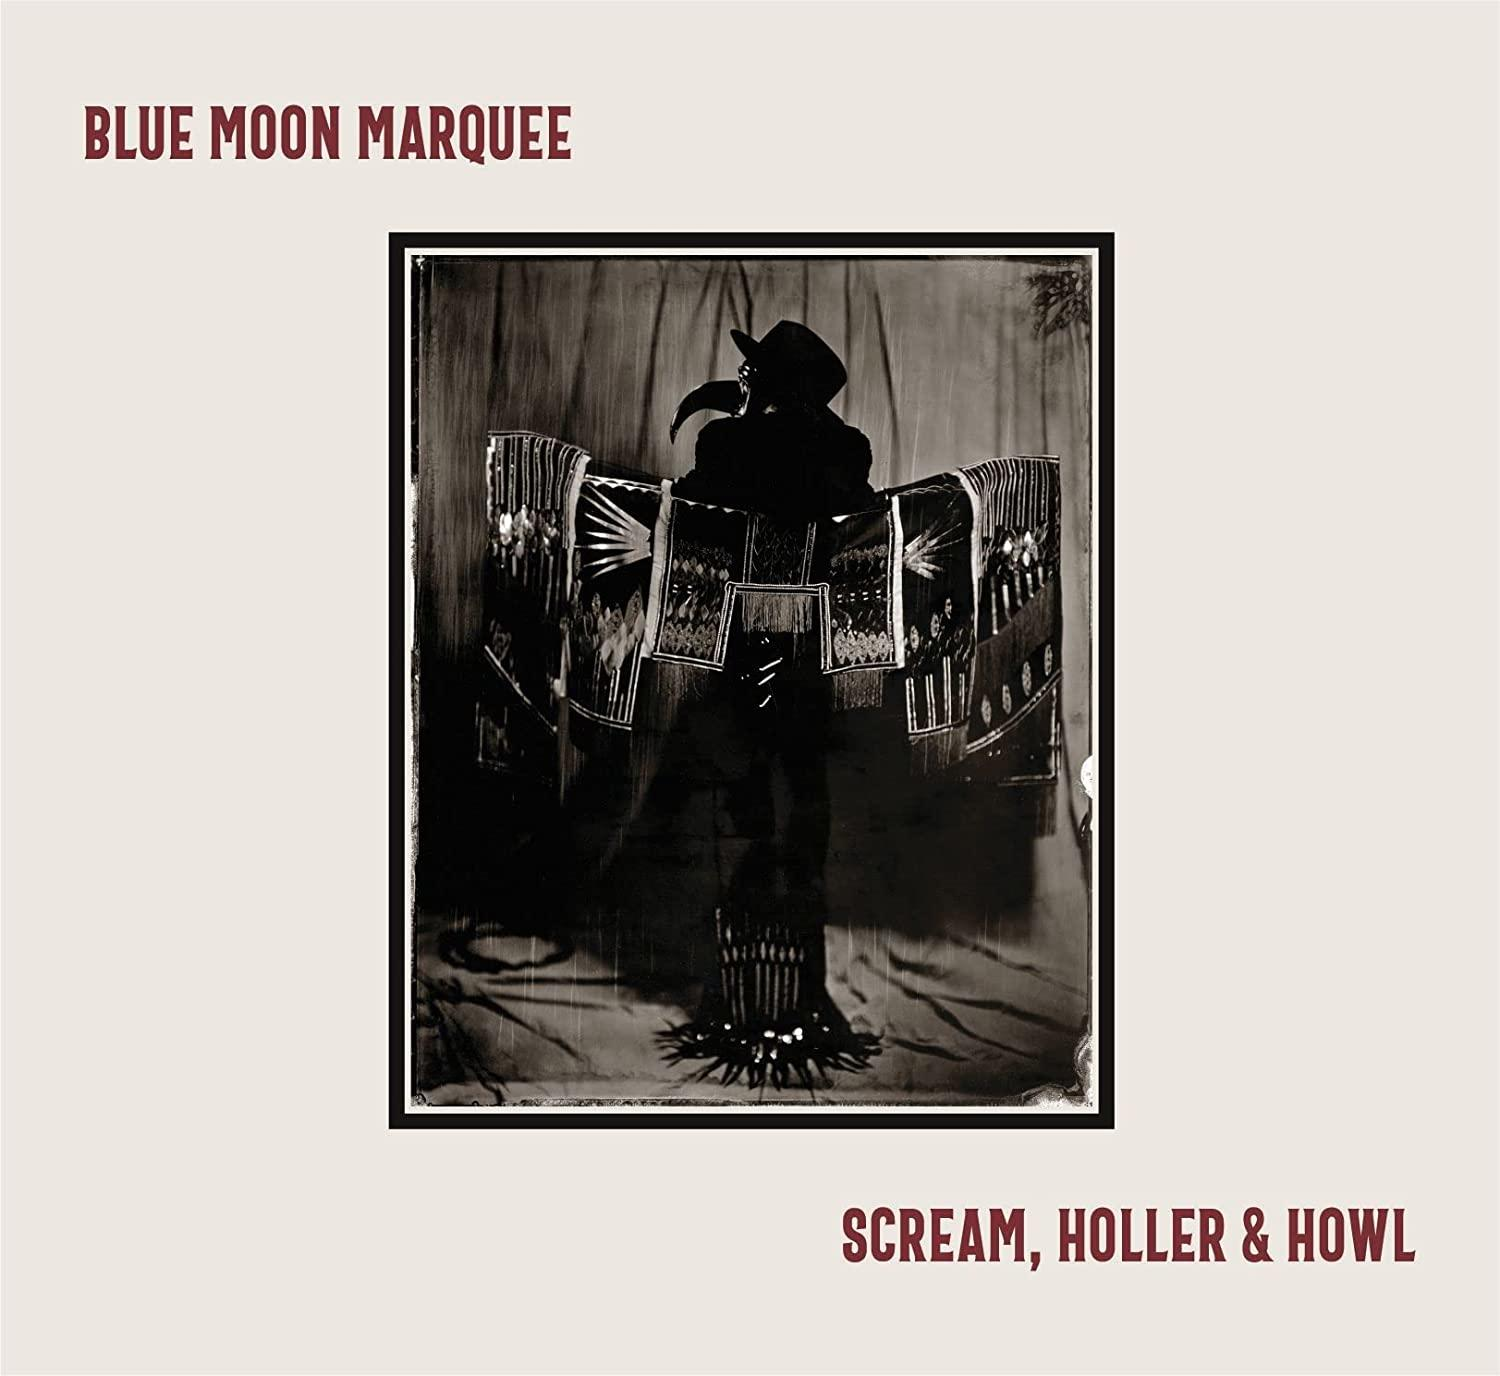 And Blue (Vinyl) HOLLER - SCREAM, - Moon HOWL Marquee